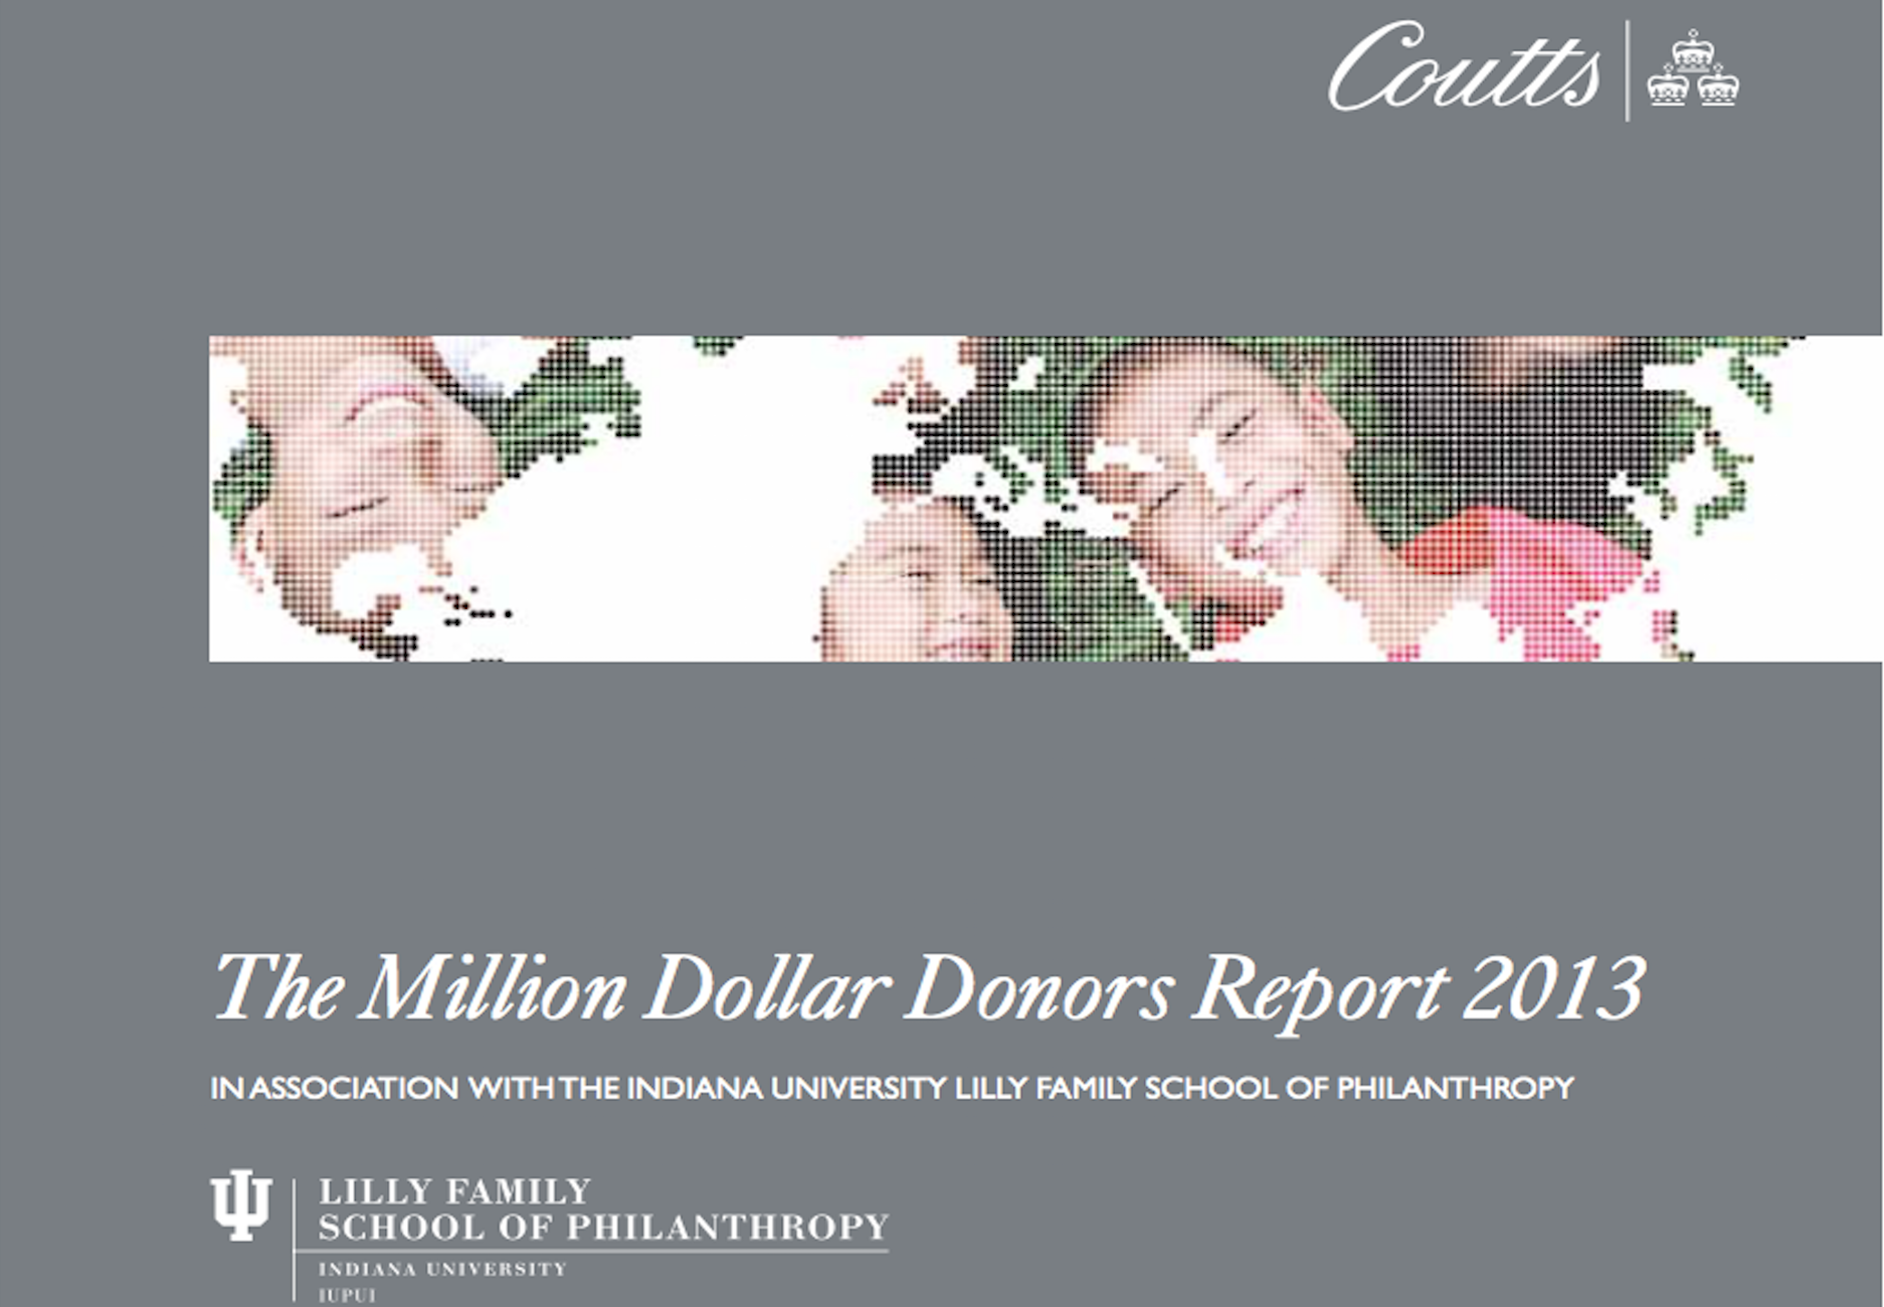 YFP Case Study published by Coutt’s Million Dollar Report